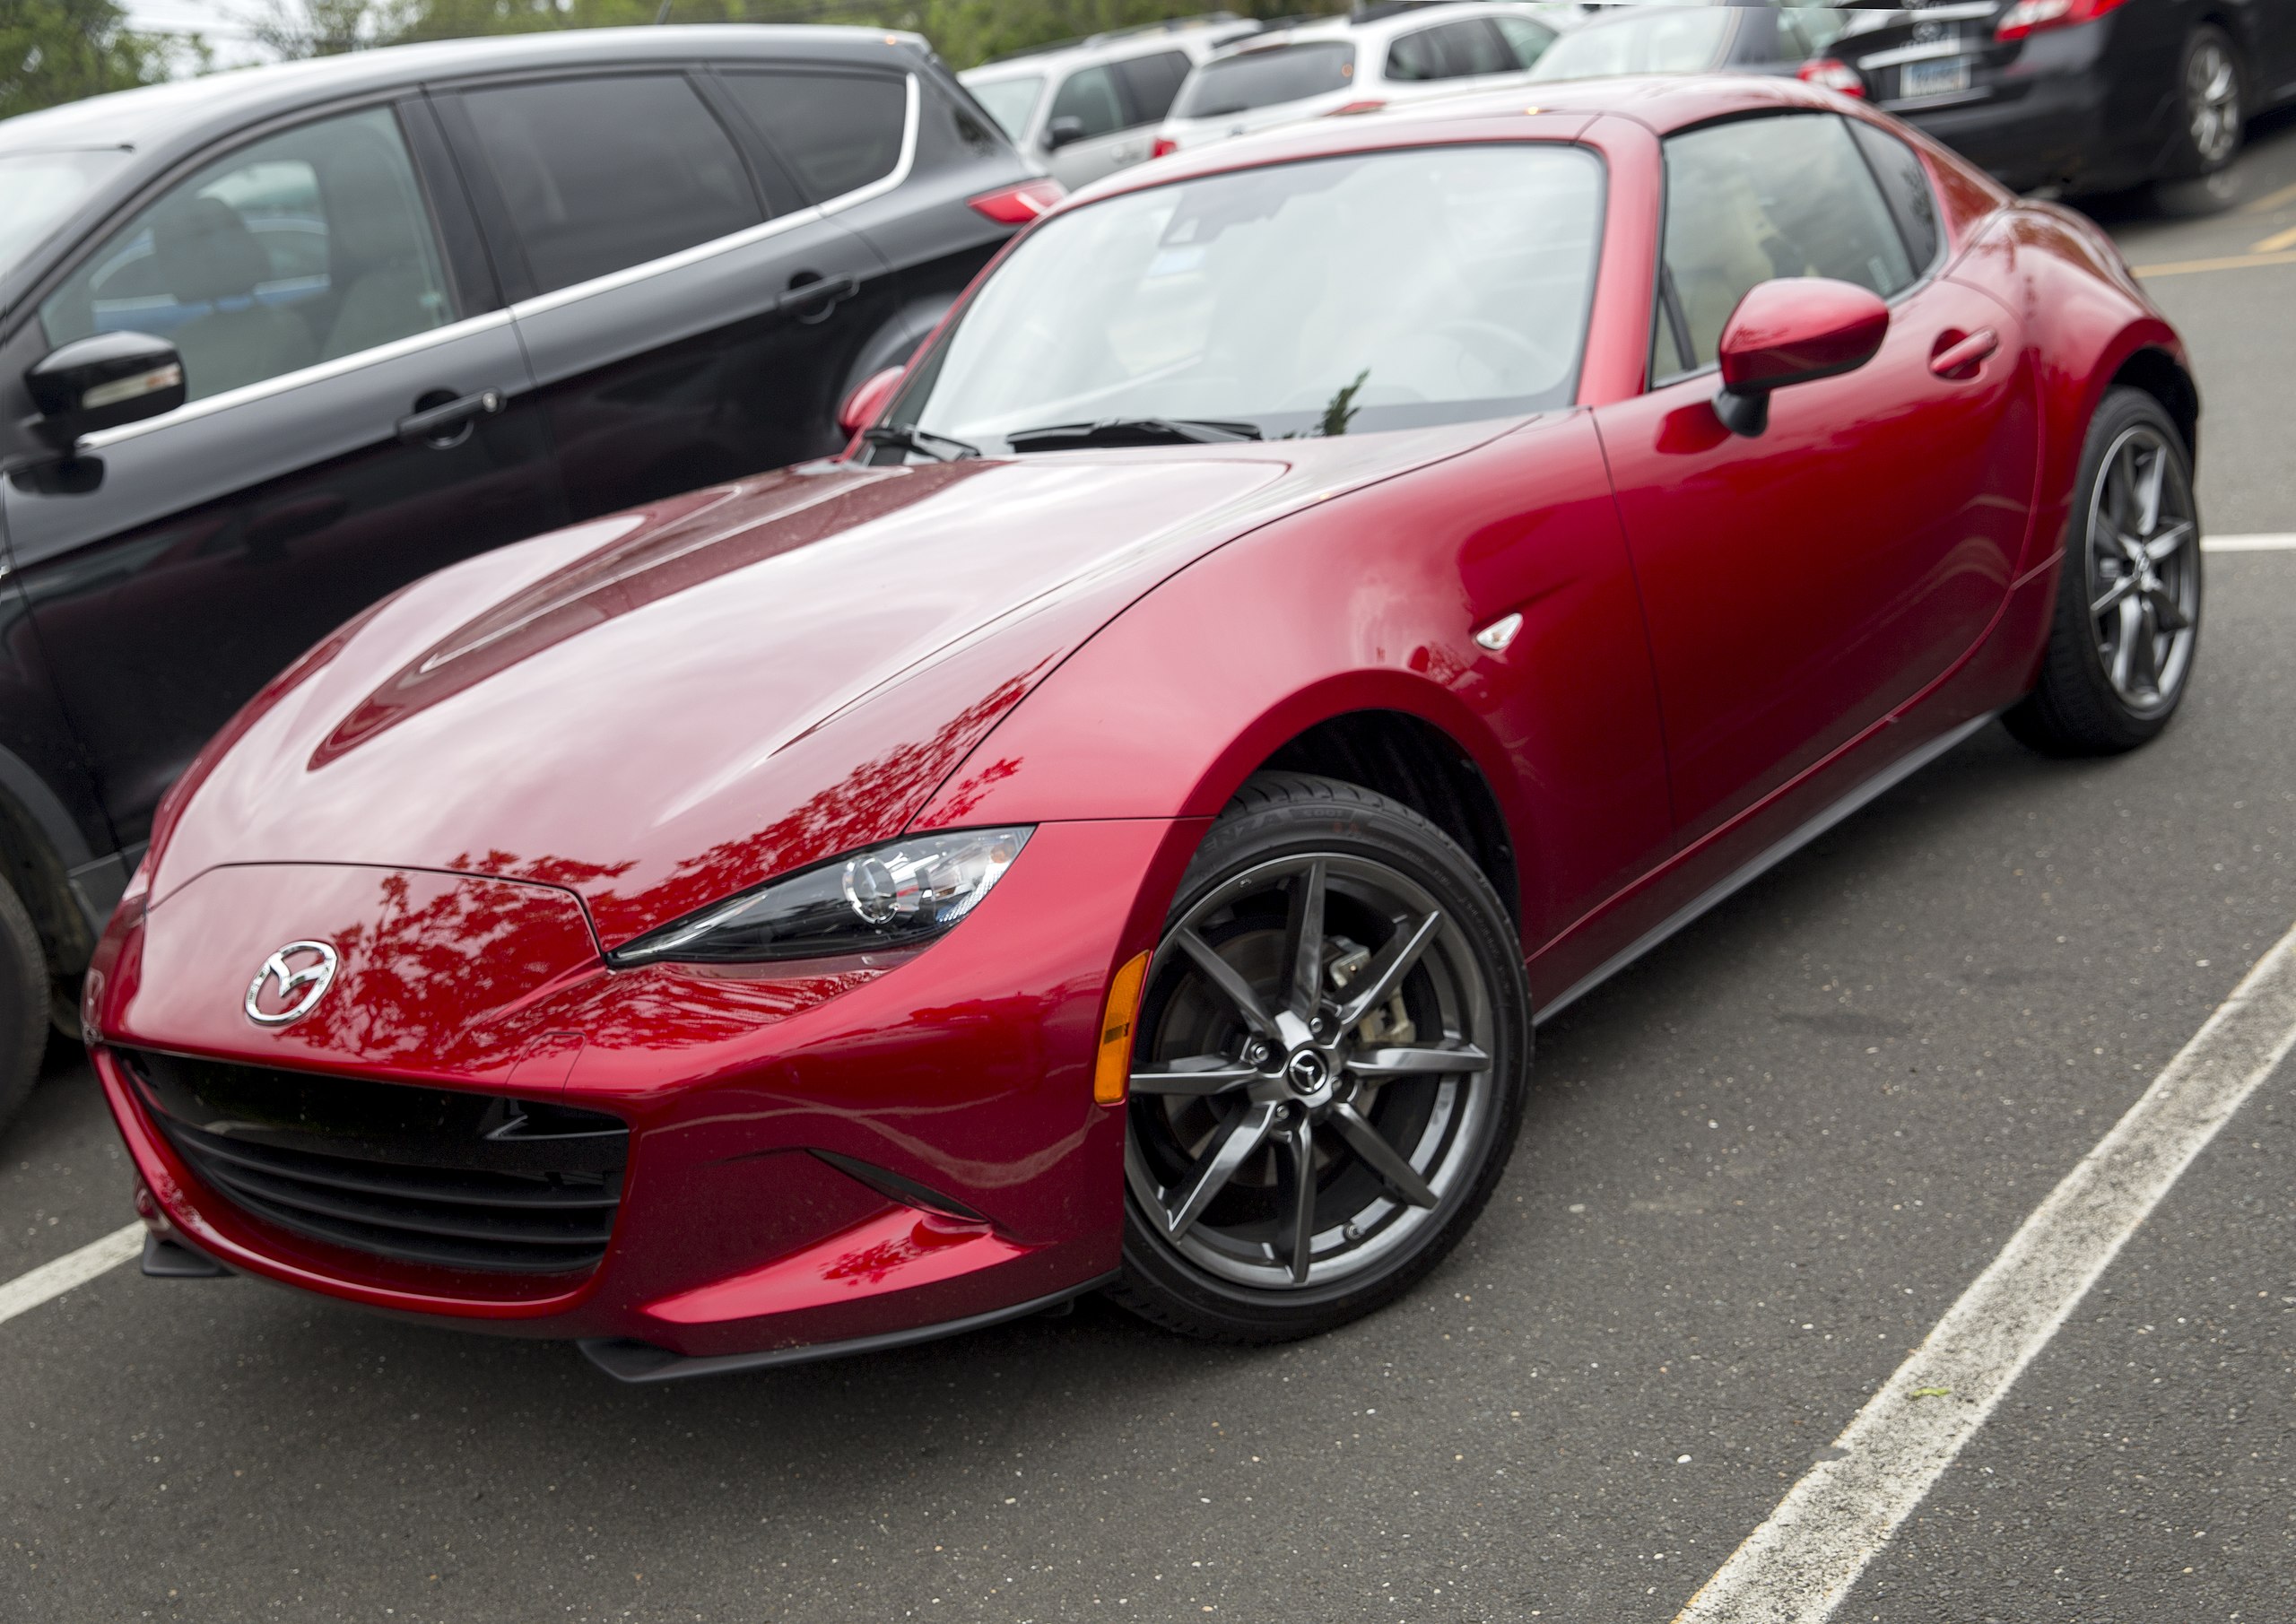 File:2018 Mazda MX-5 Miata RF Grand Touring Coupé in Soul Red Crystal,  front left.jpg - Wikimedia Commons